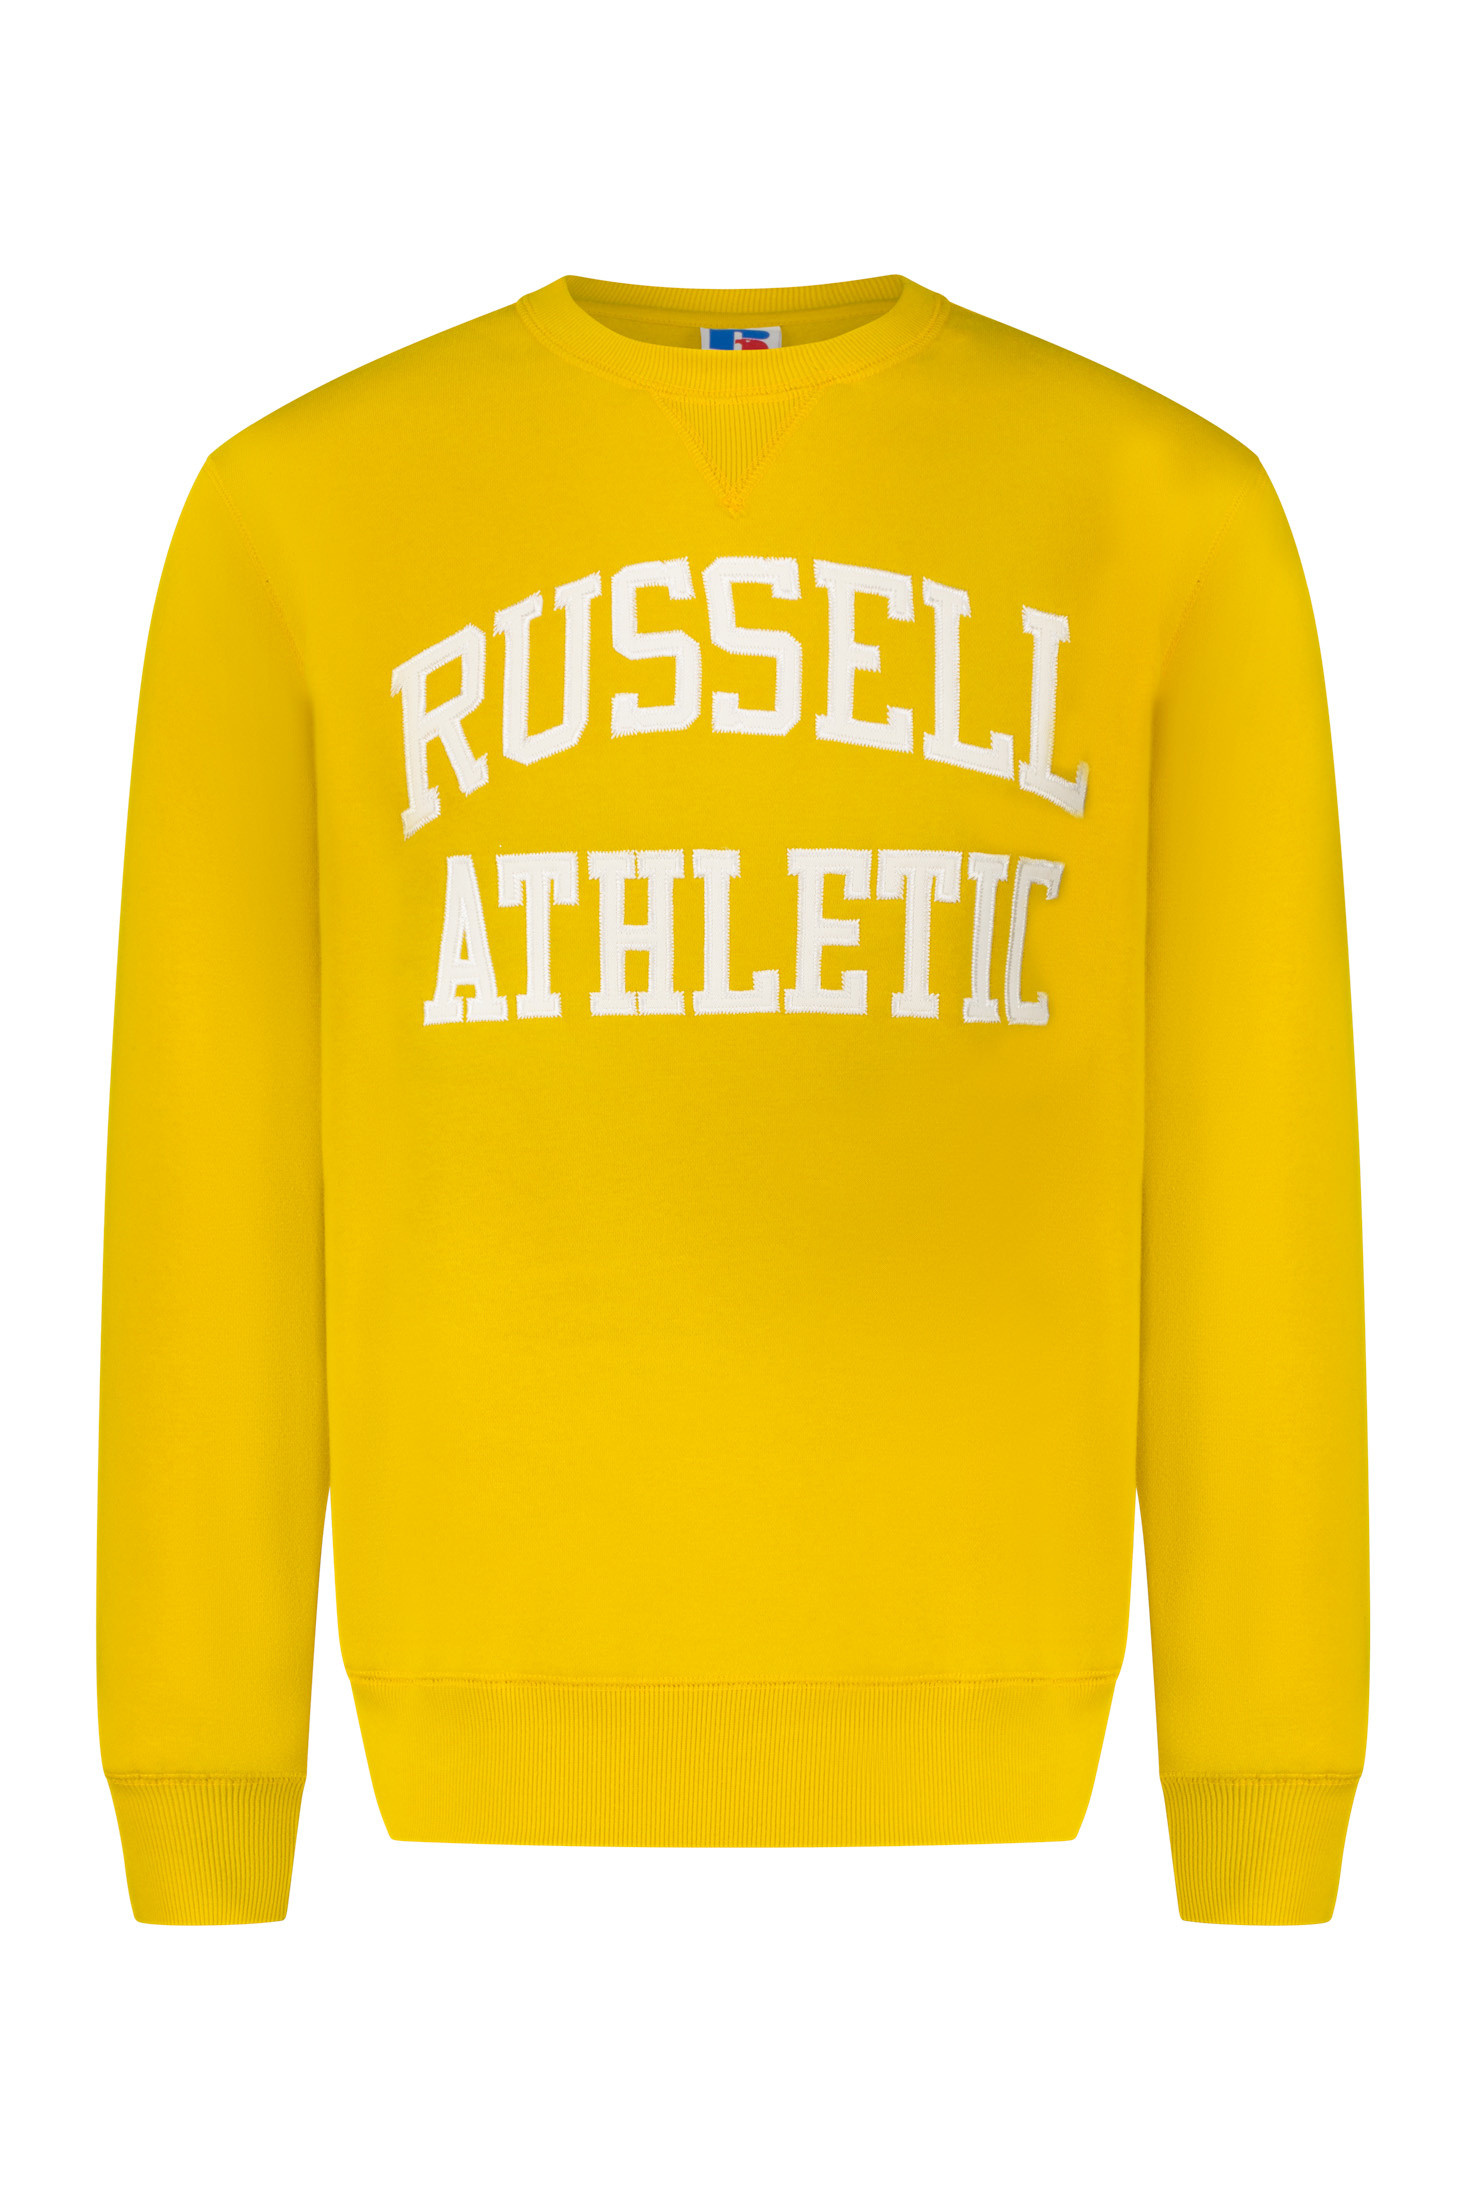 Russell Athletic - Sweatshirt with embroidery, Yellow, large image number 0